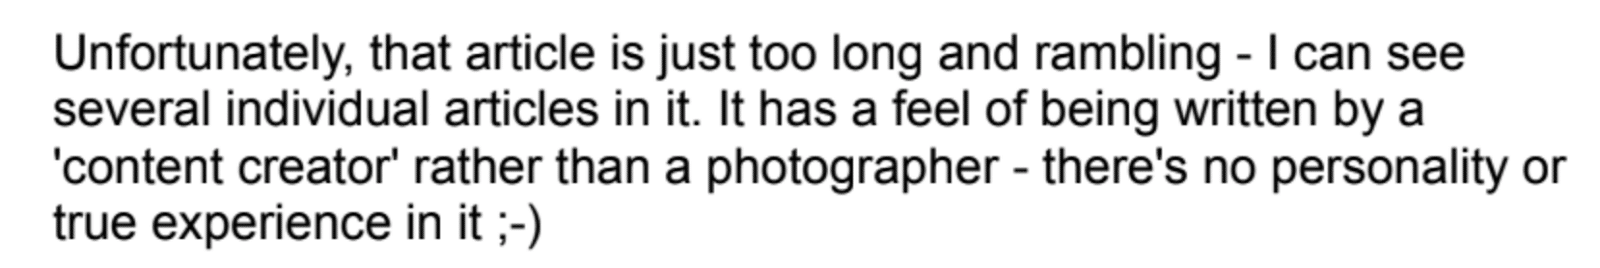 Screenshot of feedback for article saying it feels like it was written by a content creator, not a photographer.